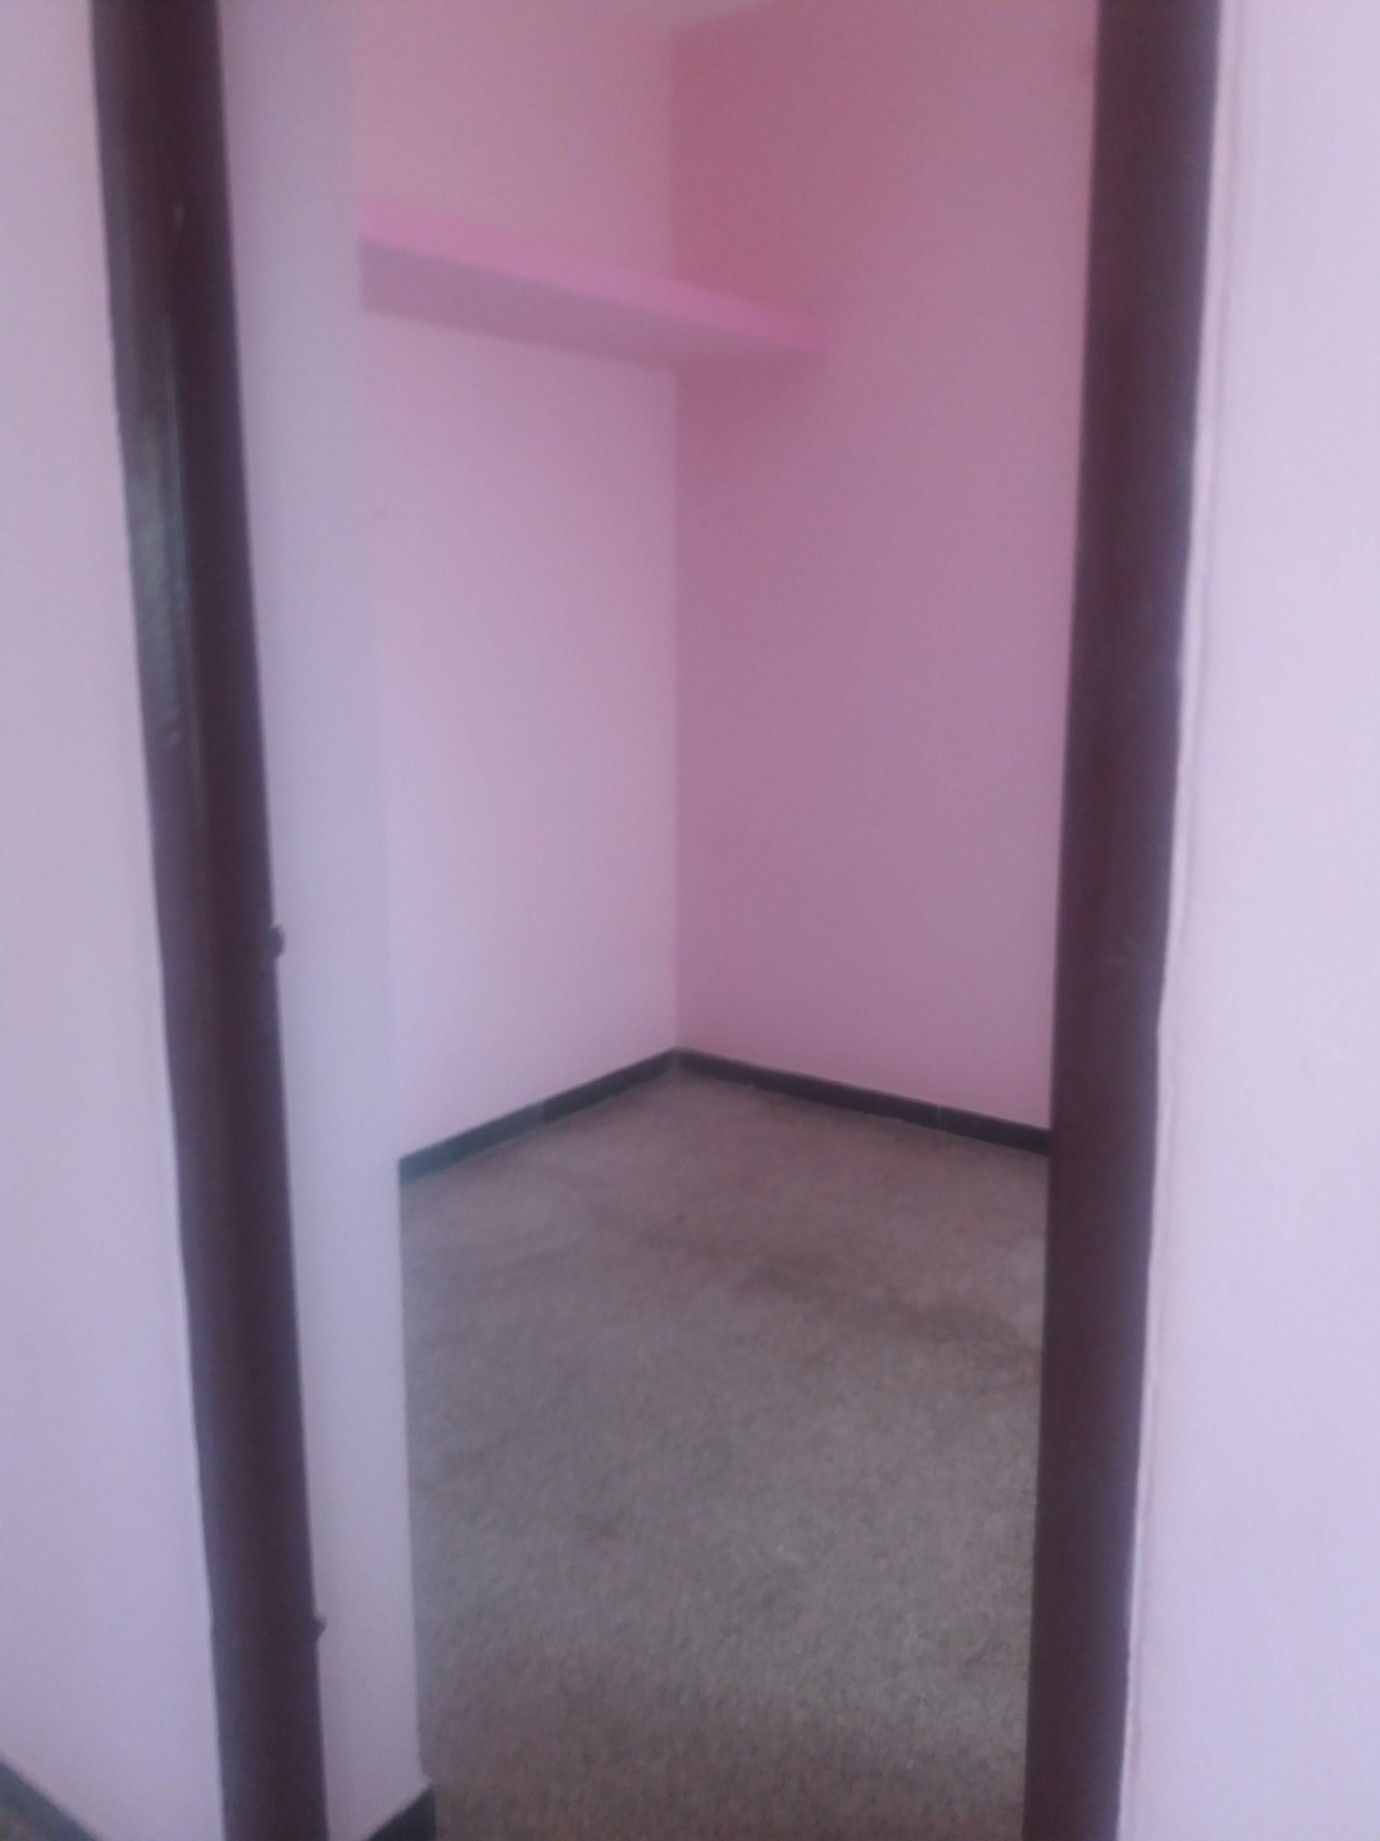 House for Rent in Udyampalayam, Chinnvedampatti 